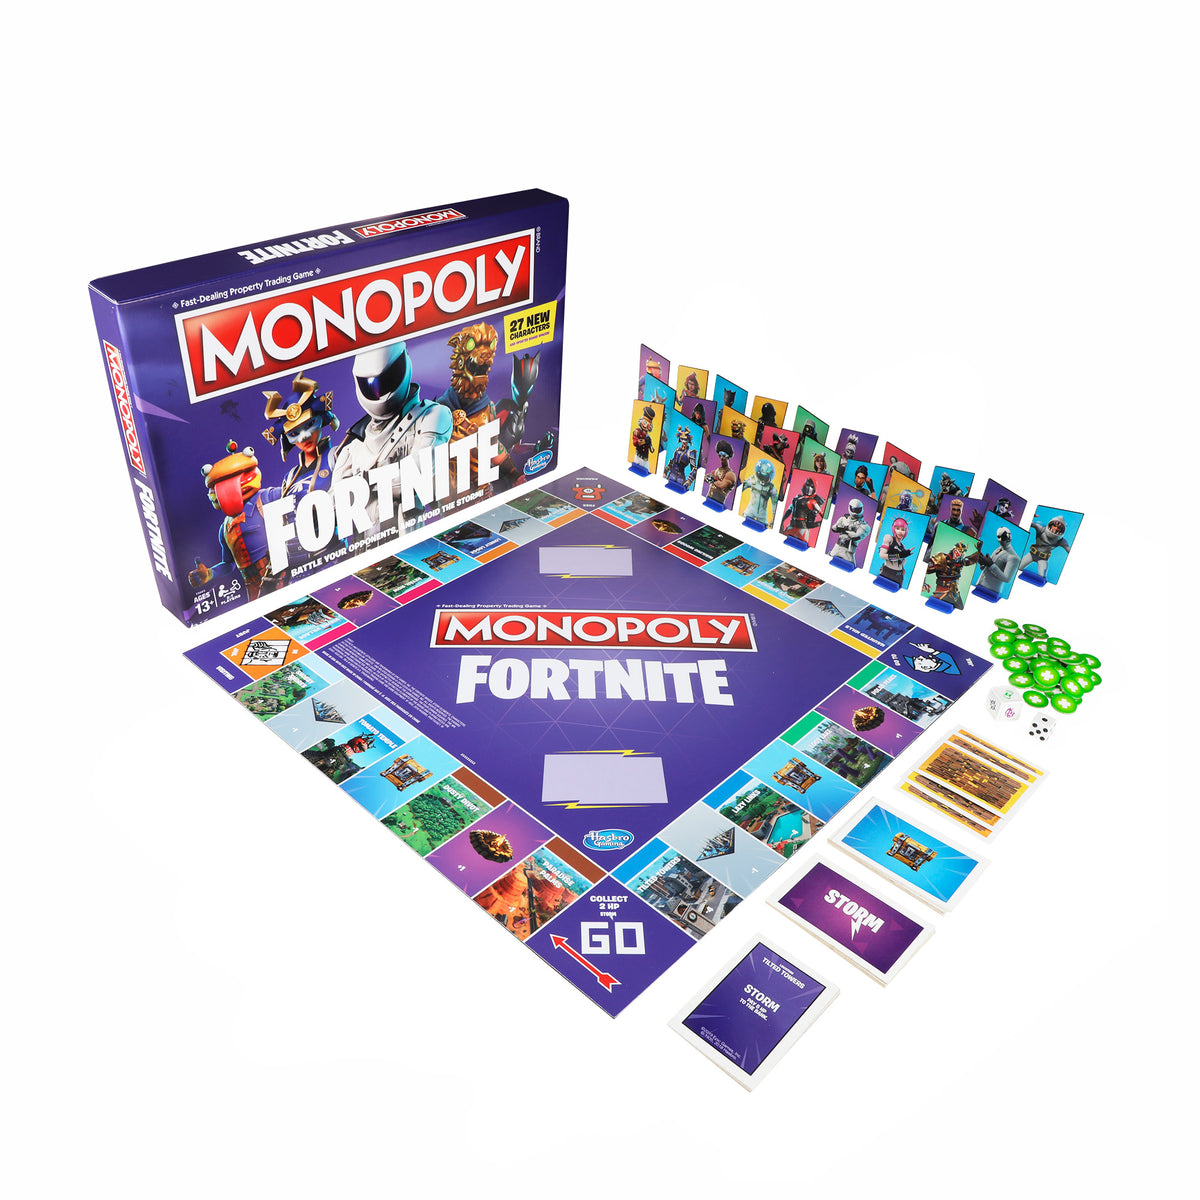 Monopoly Fortnite Edition Board Game-New UnOpened